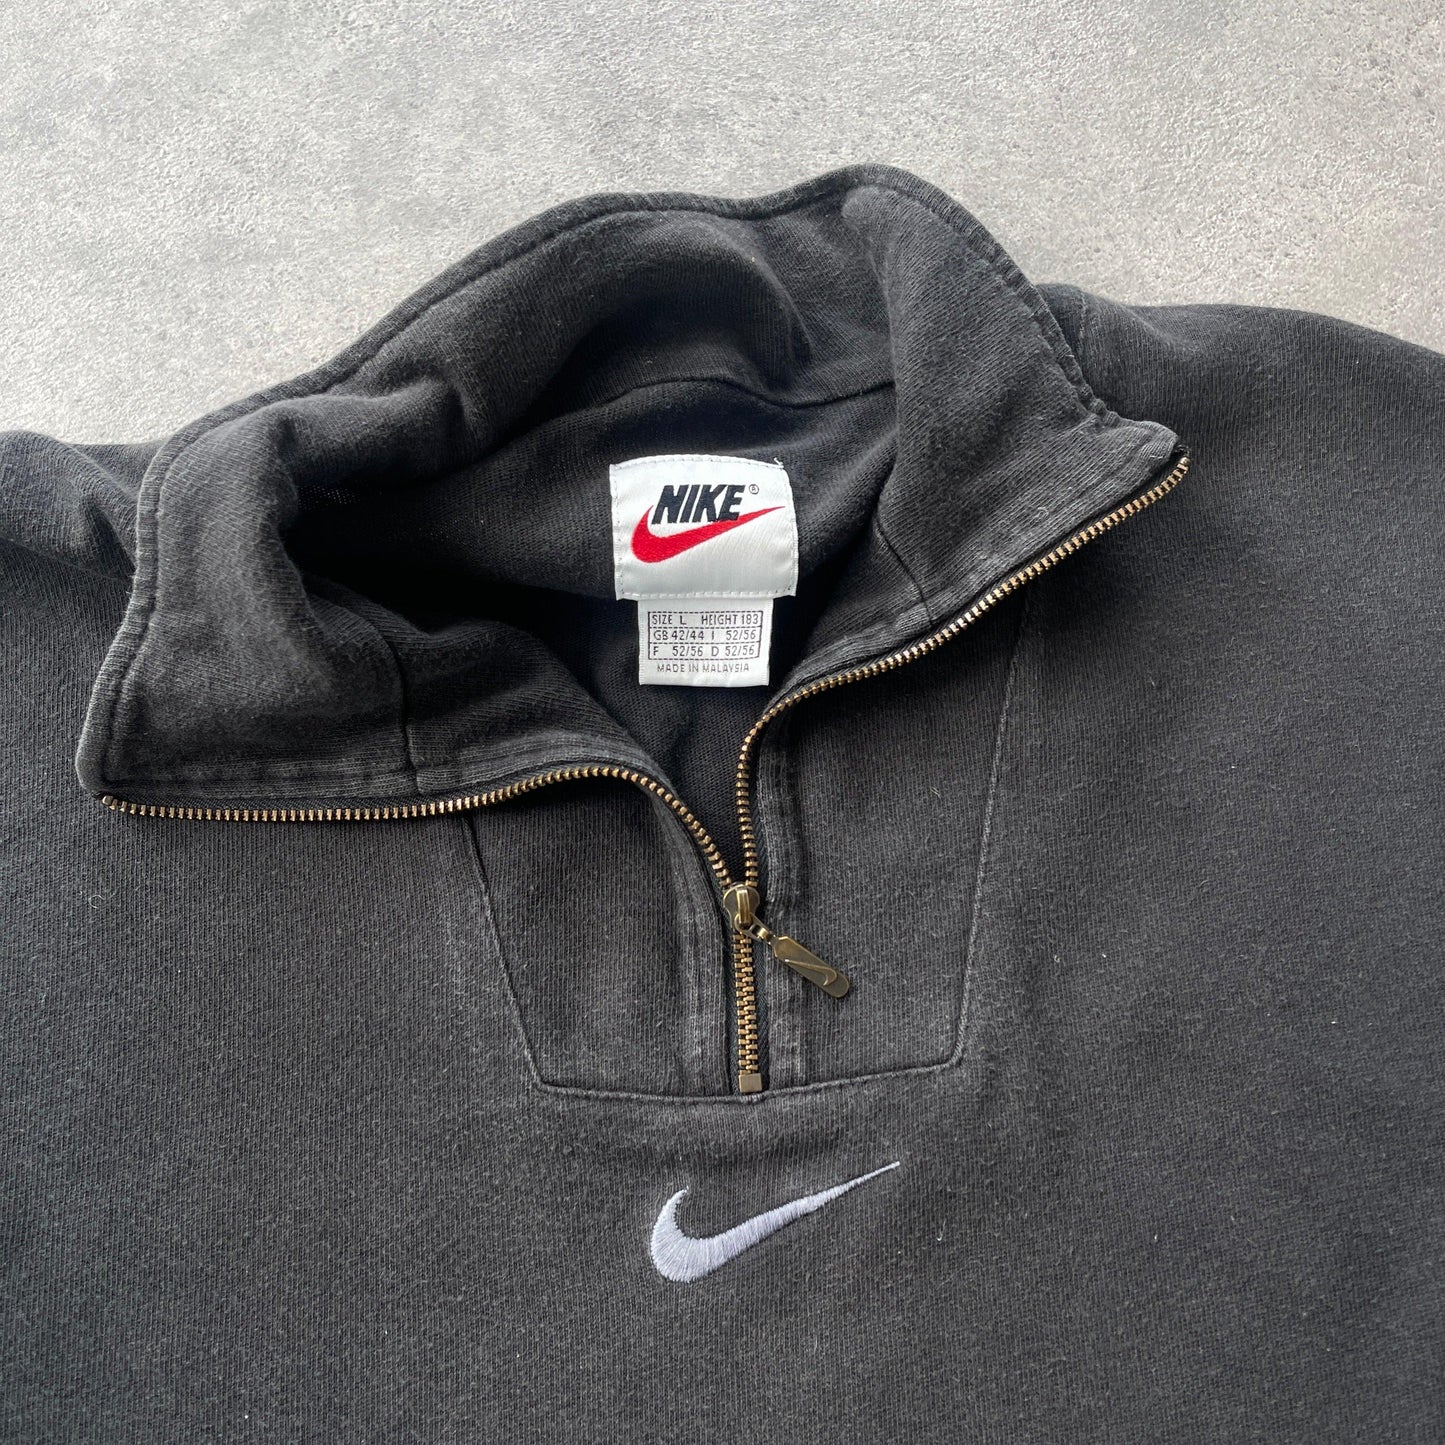 Nike 1990s 1/4 zip heavyweight embroidered sweatshirt (L) - Known Source